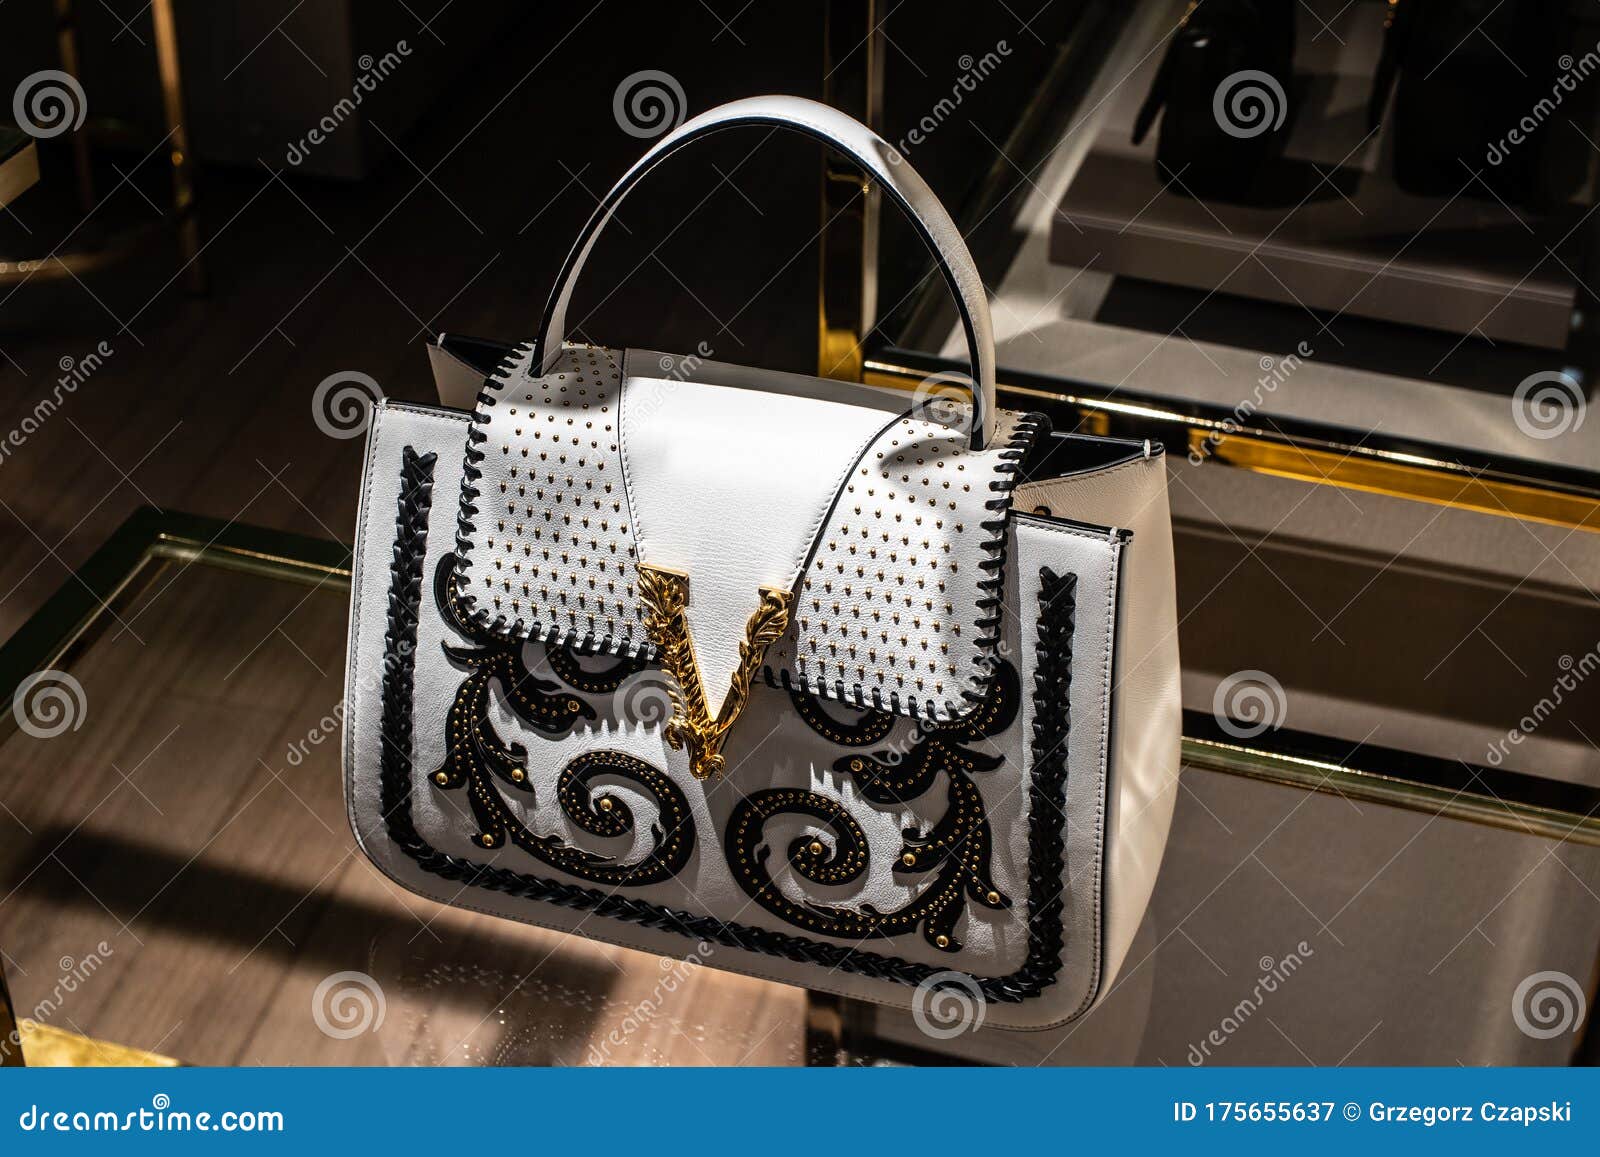 Versace Fashion Store, Window Shop, Clothes, Shoes, Bags on Display for ...